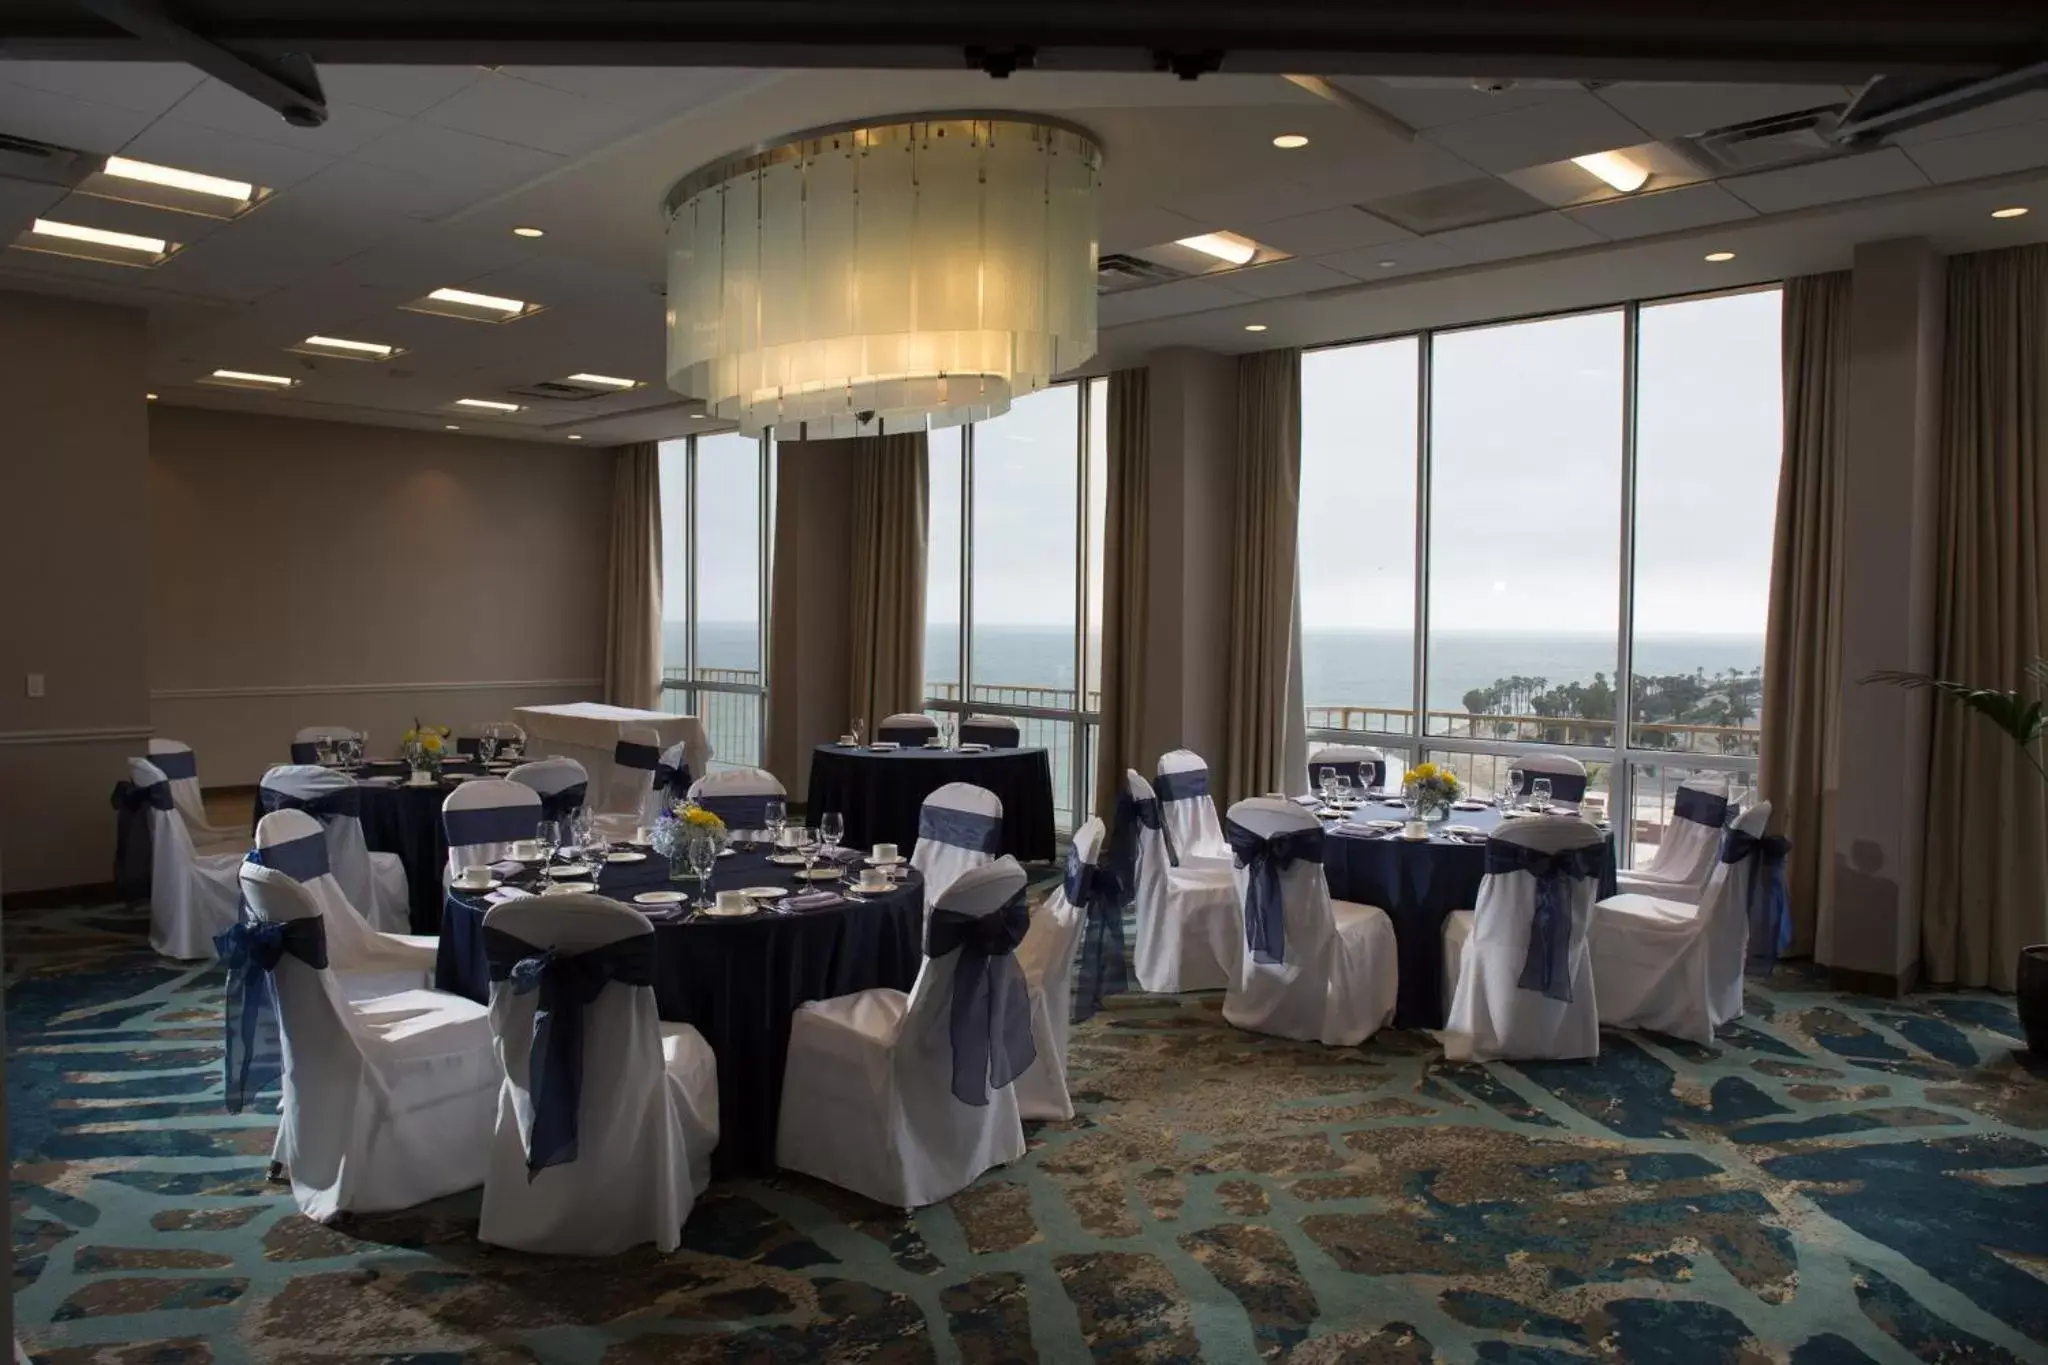 Meeting/conference room, Banquet Facilities in Crowne Plaza Hotel Ventura Beach, an IHG Hotel